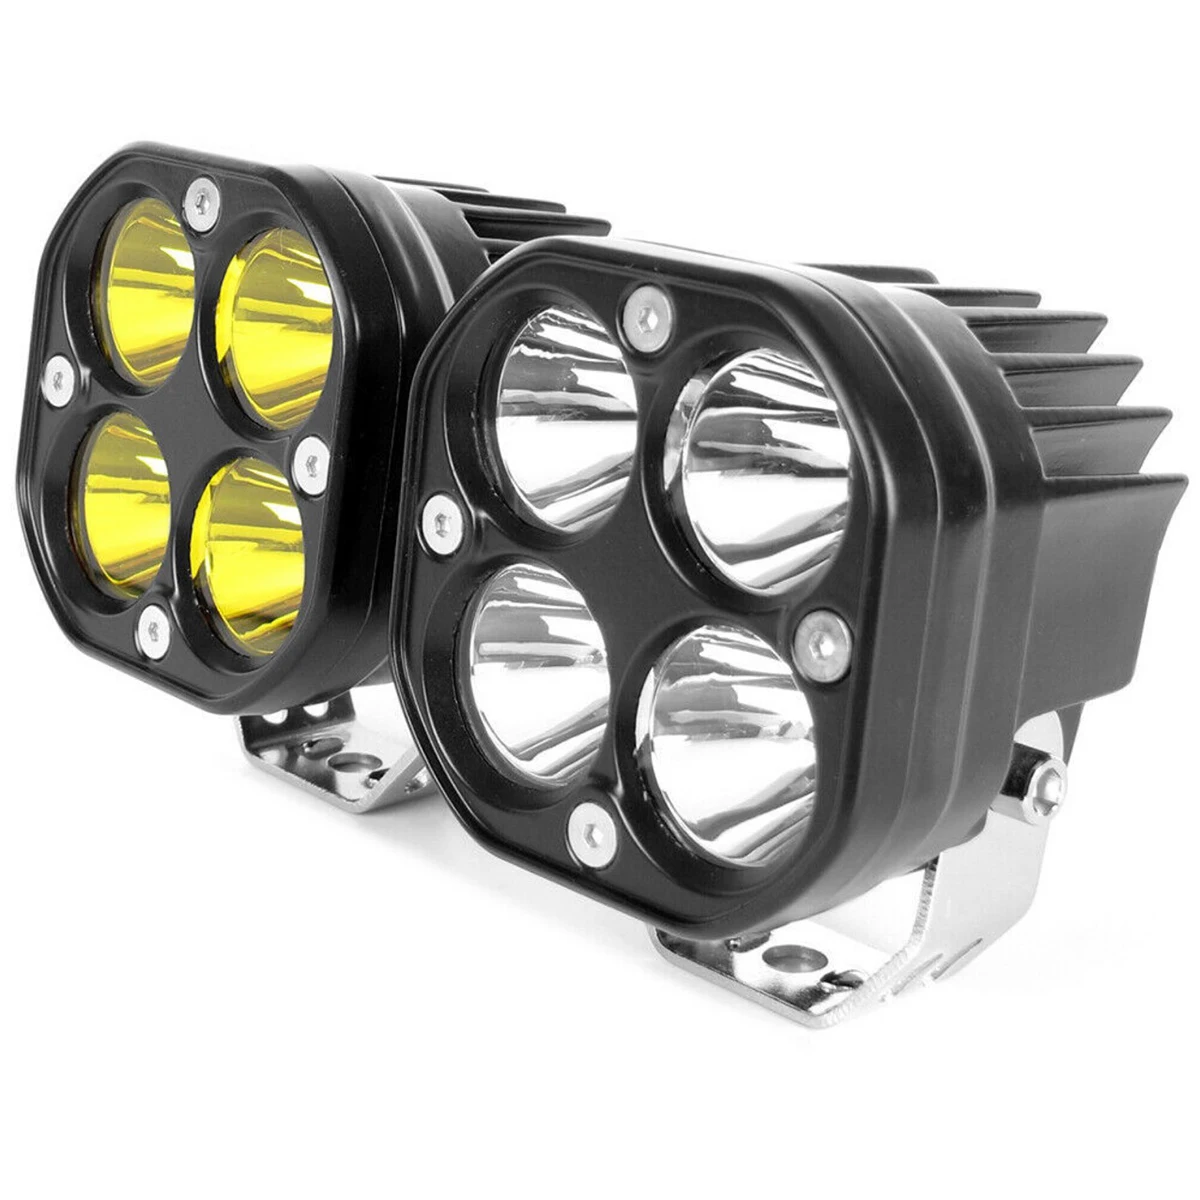 

3 Inch 40W White Yellow Motorcycle Driving Lights Led Work Light Bar Cube Pods Spotlight For 4x4 Offroad Tractors Truck ATV SUV